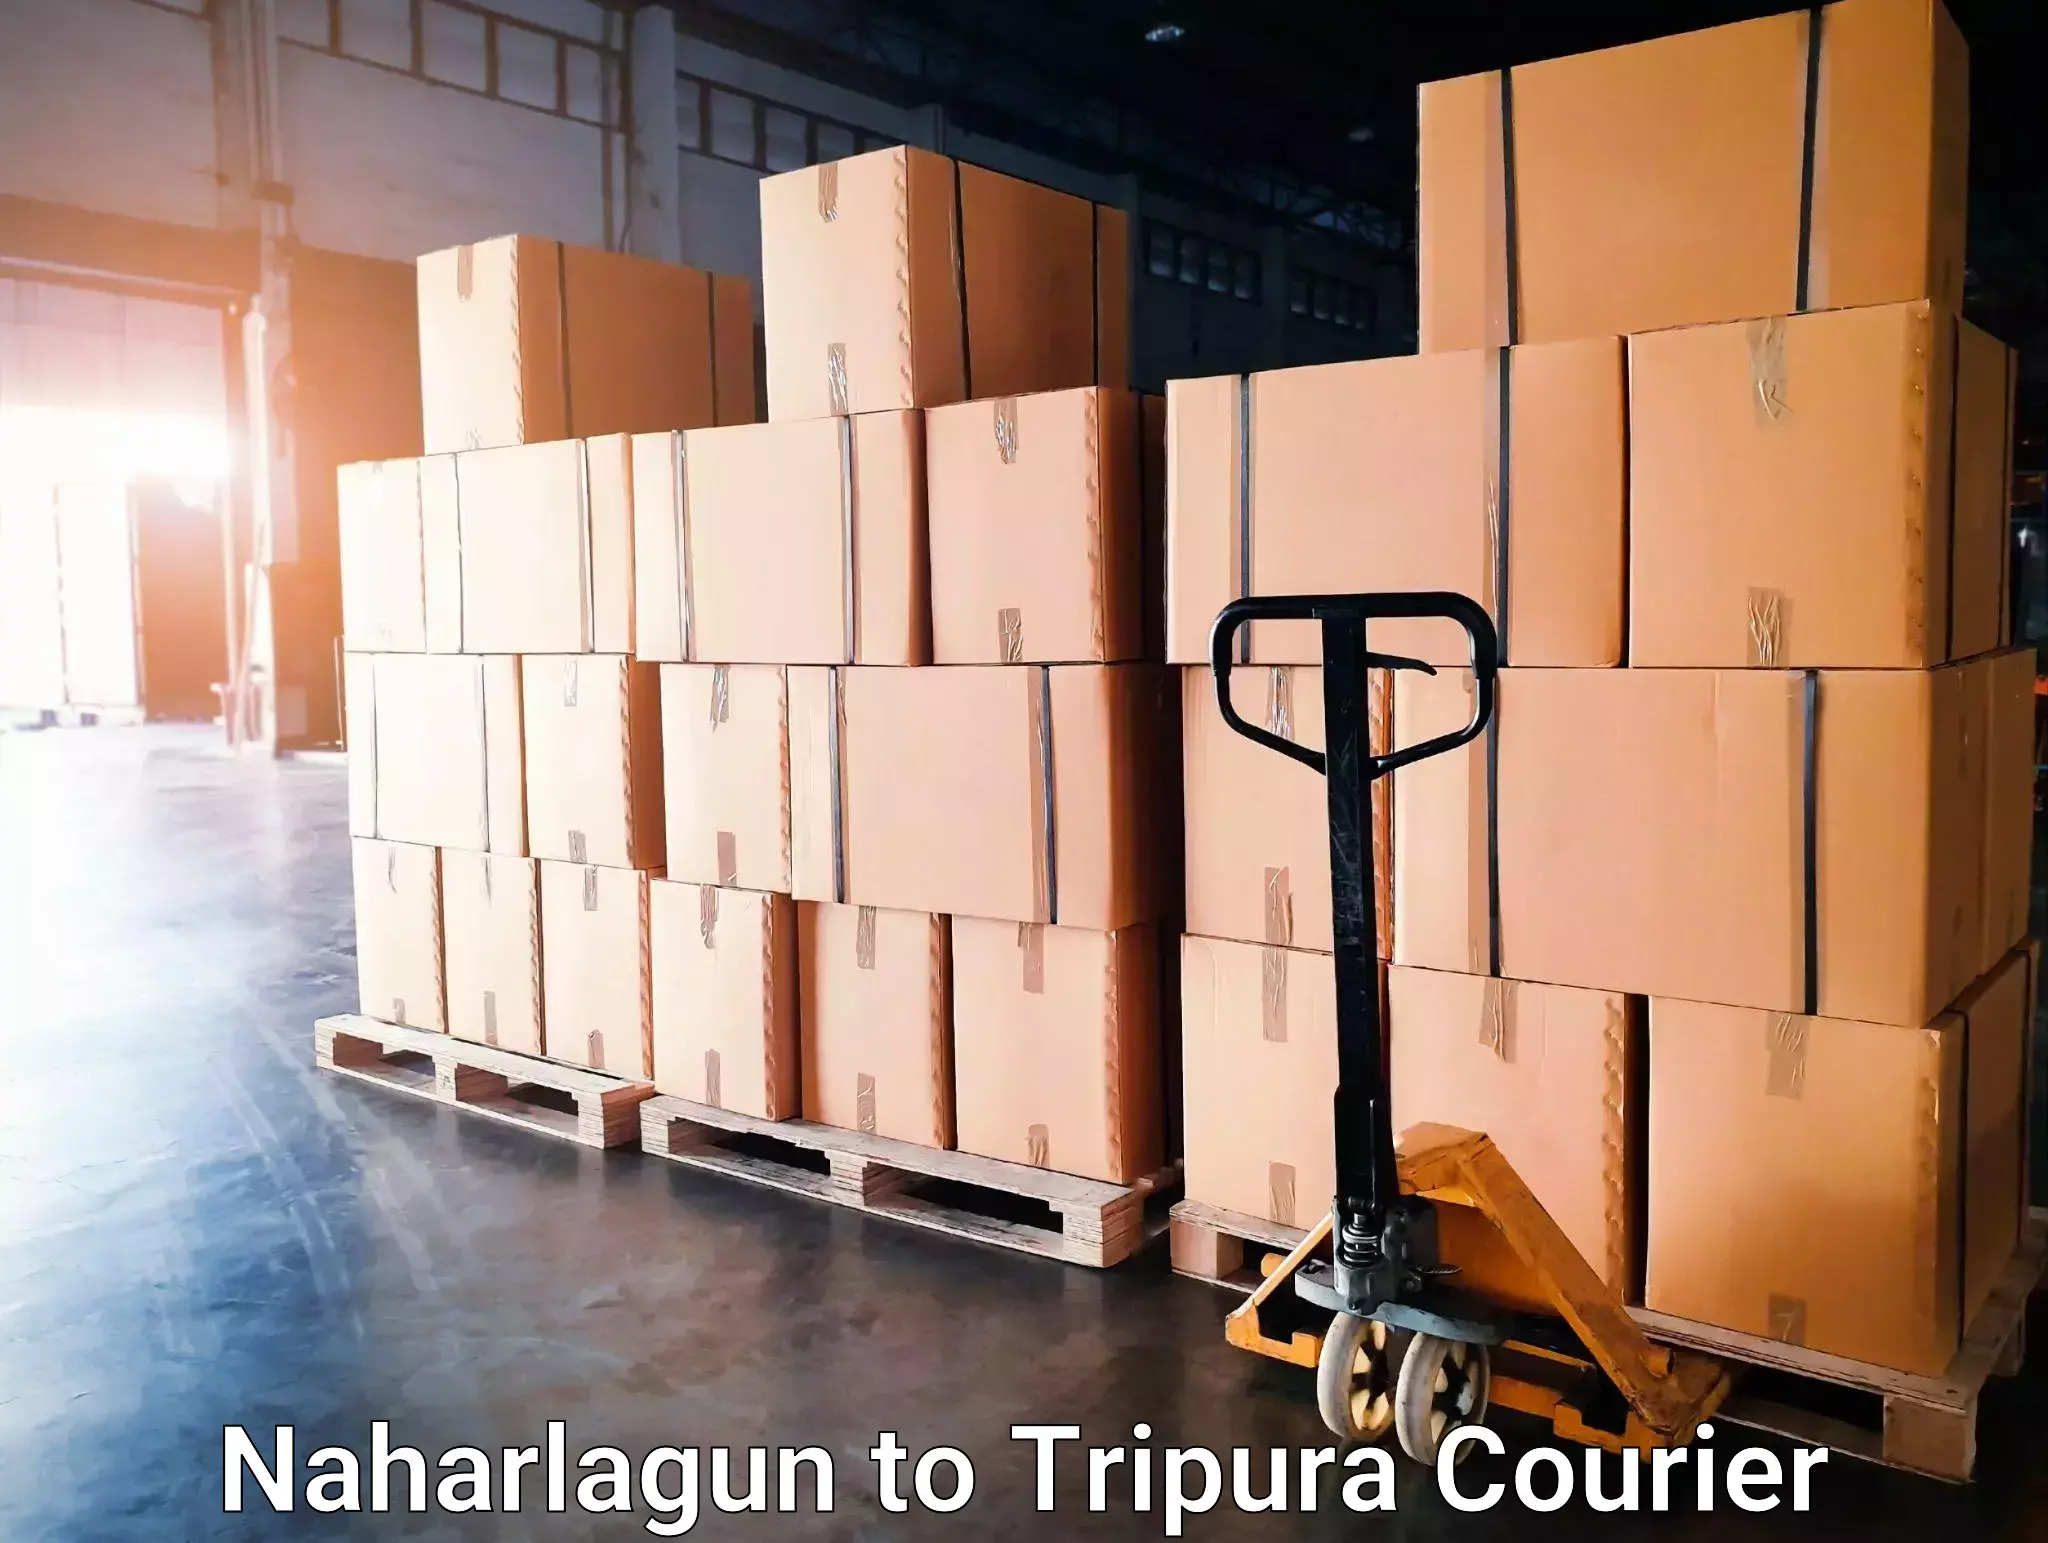 Courier service comparison in Naharlagun to Aambasa